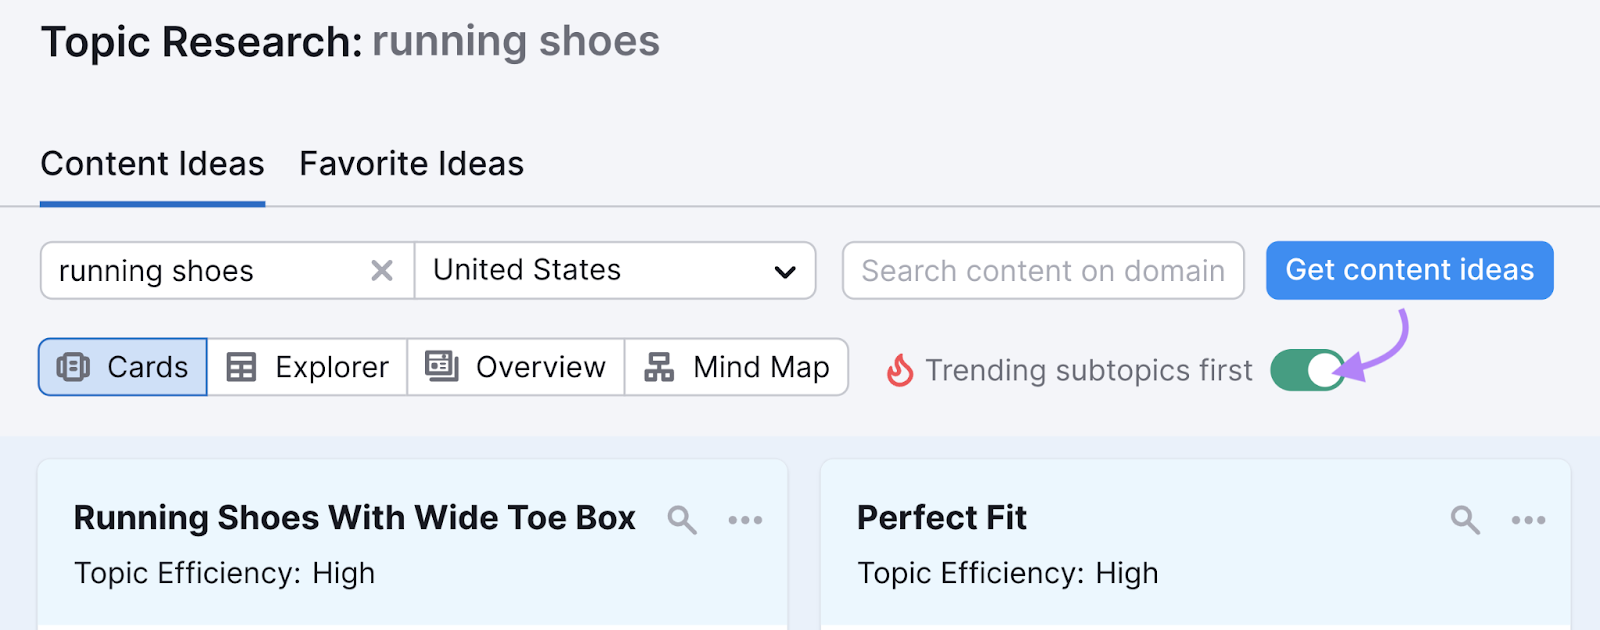 flame icon with" trending subtopics first" text followed by toggle button